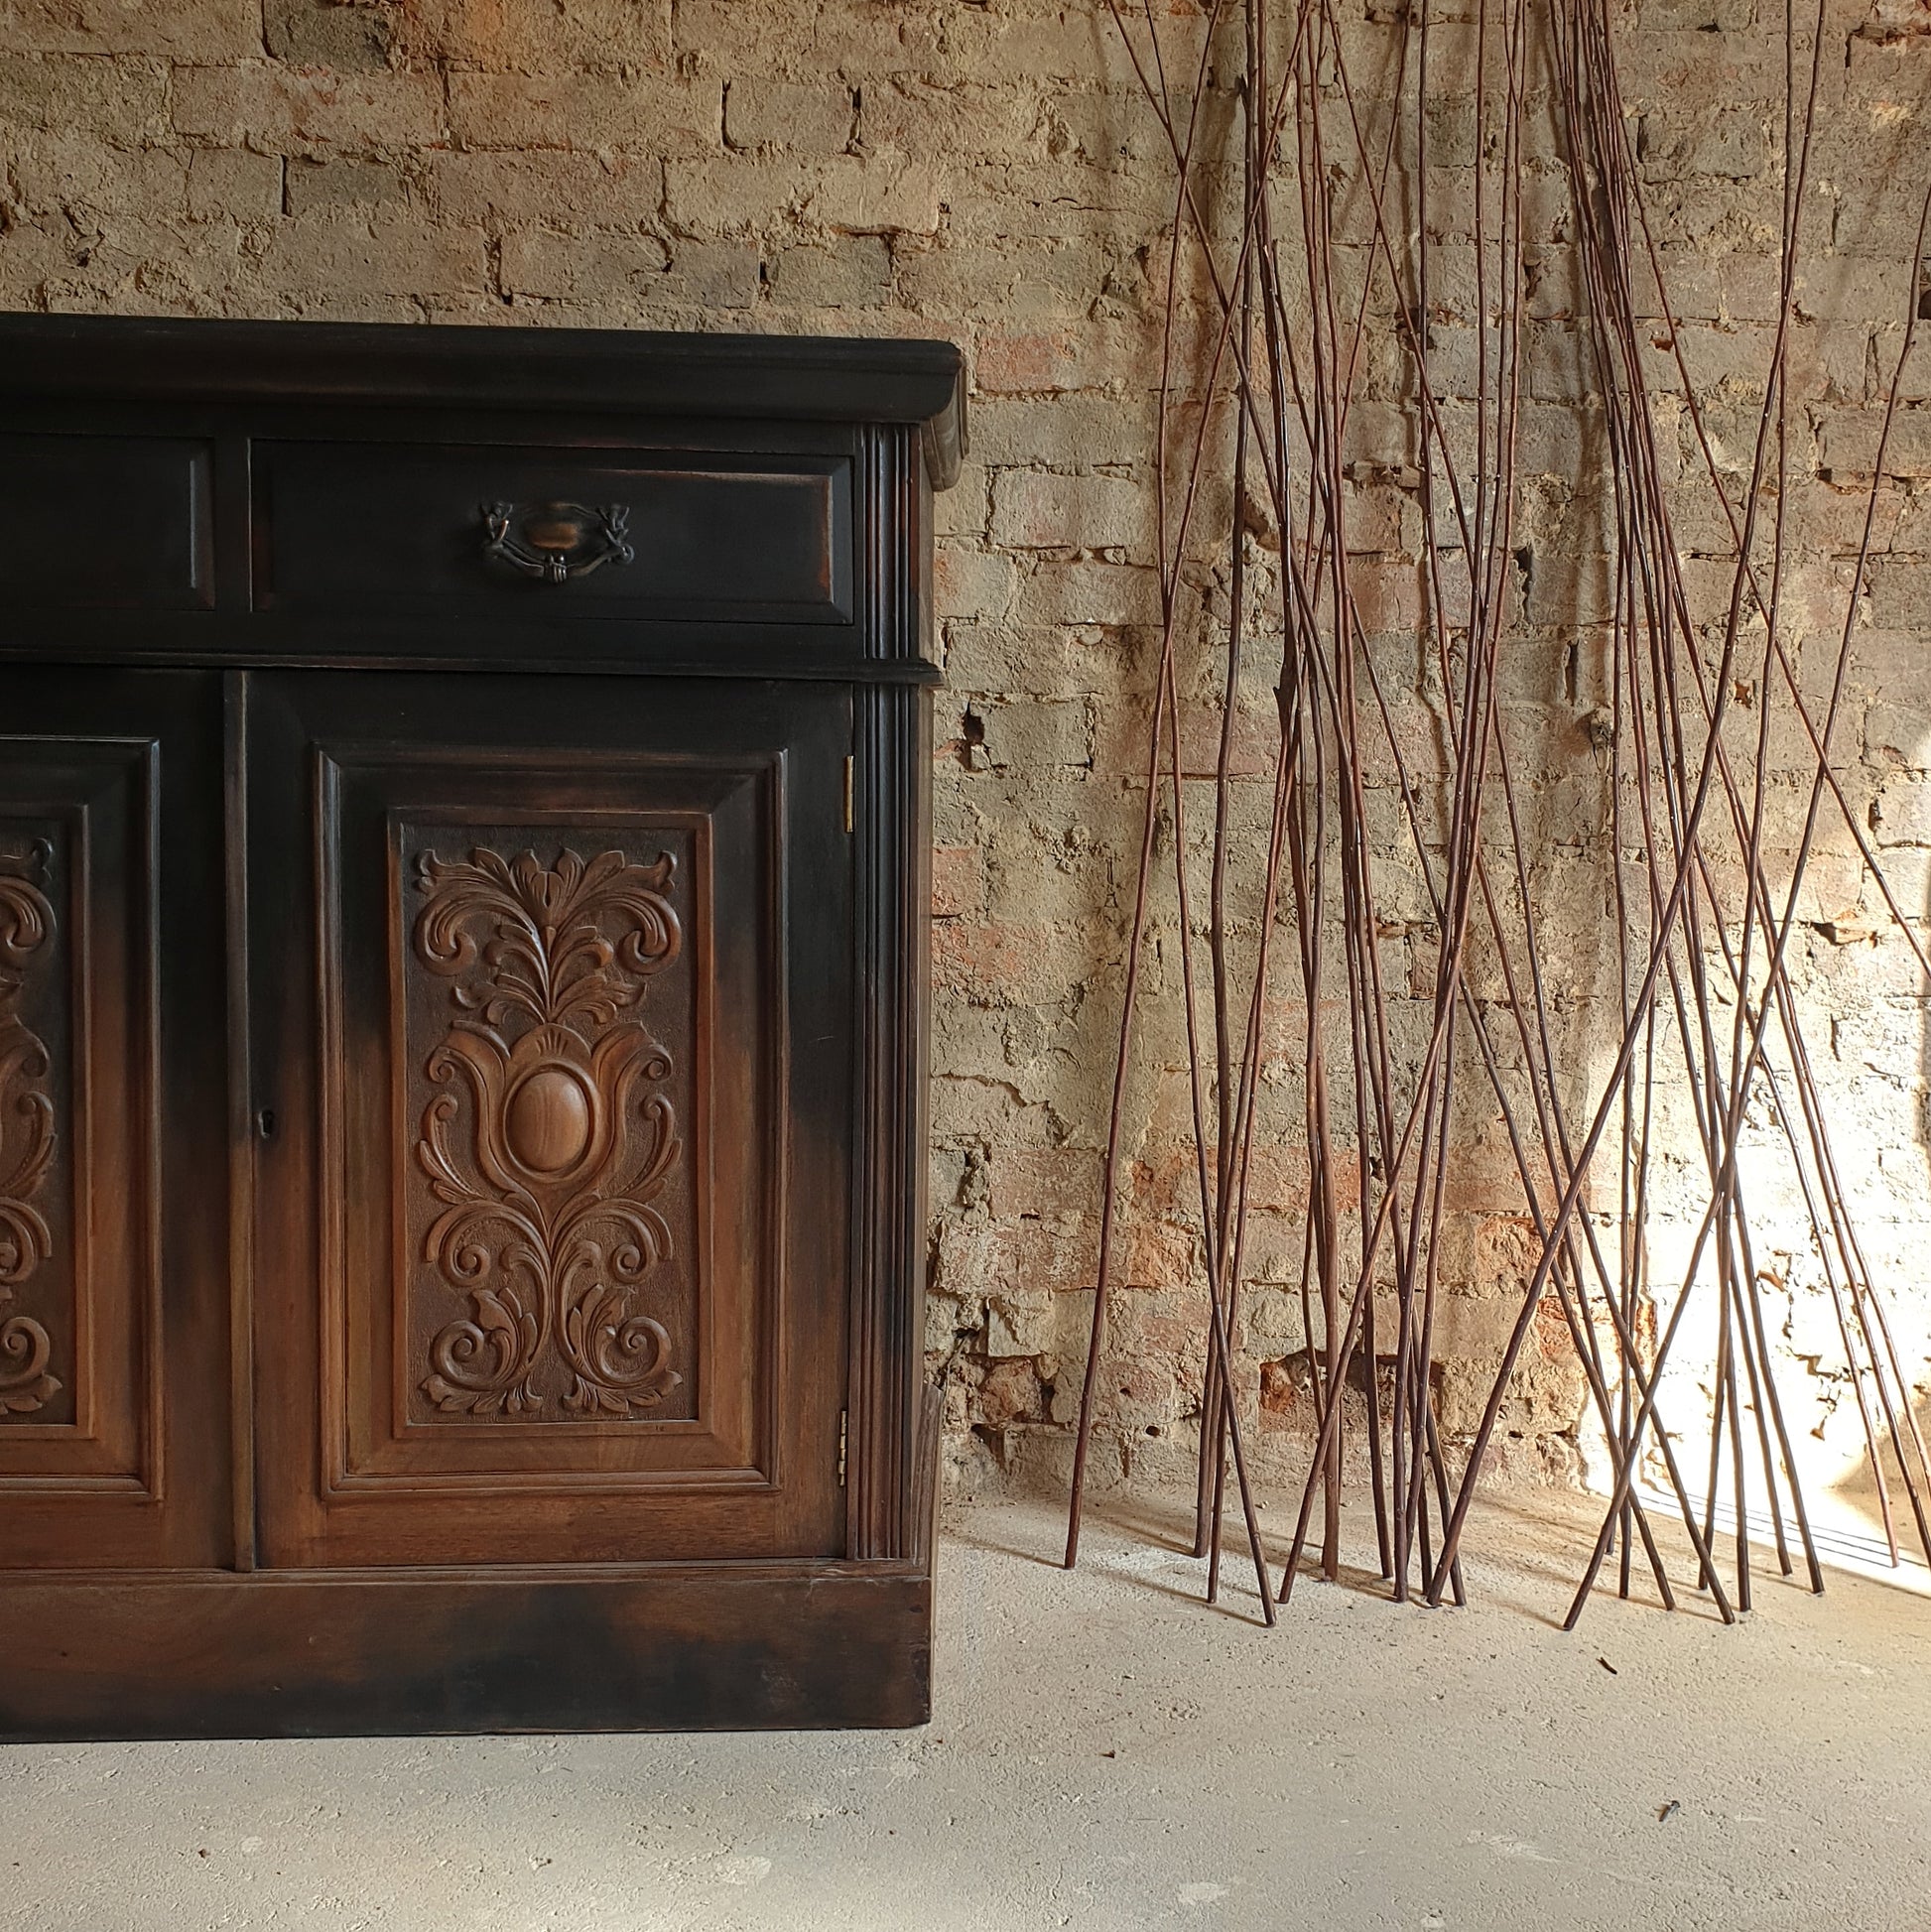 Edwardian Mahogany carved Sideboard with black ombre paint effect.